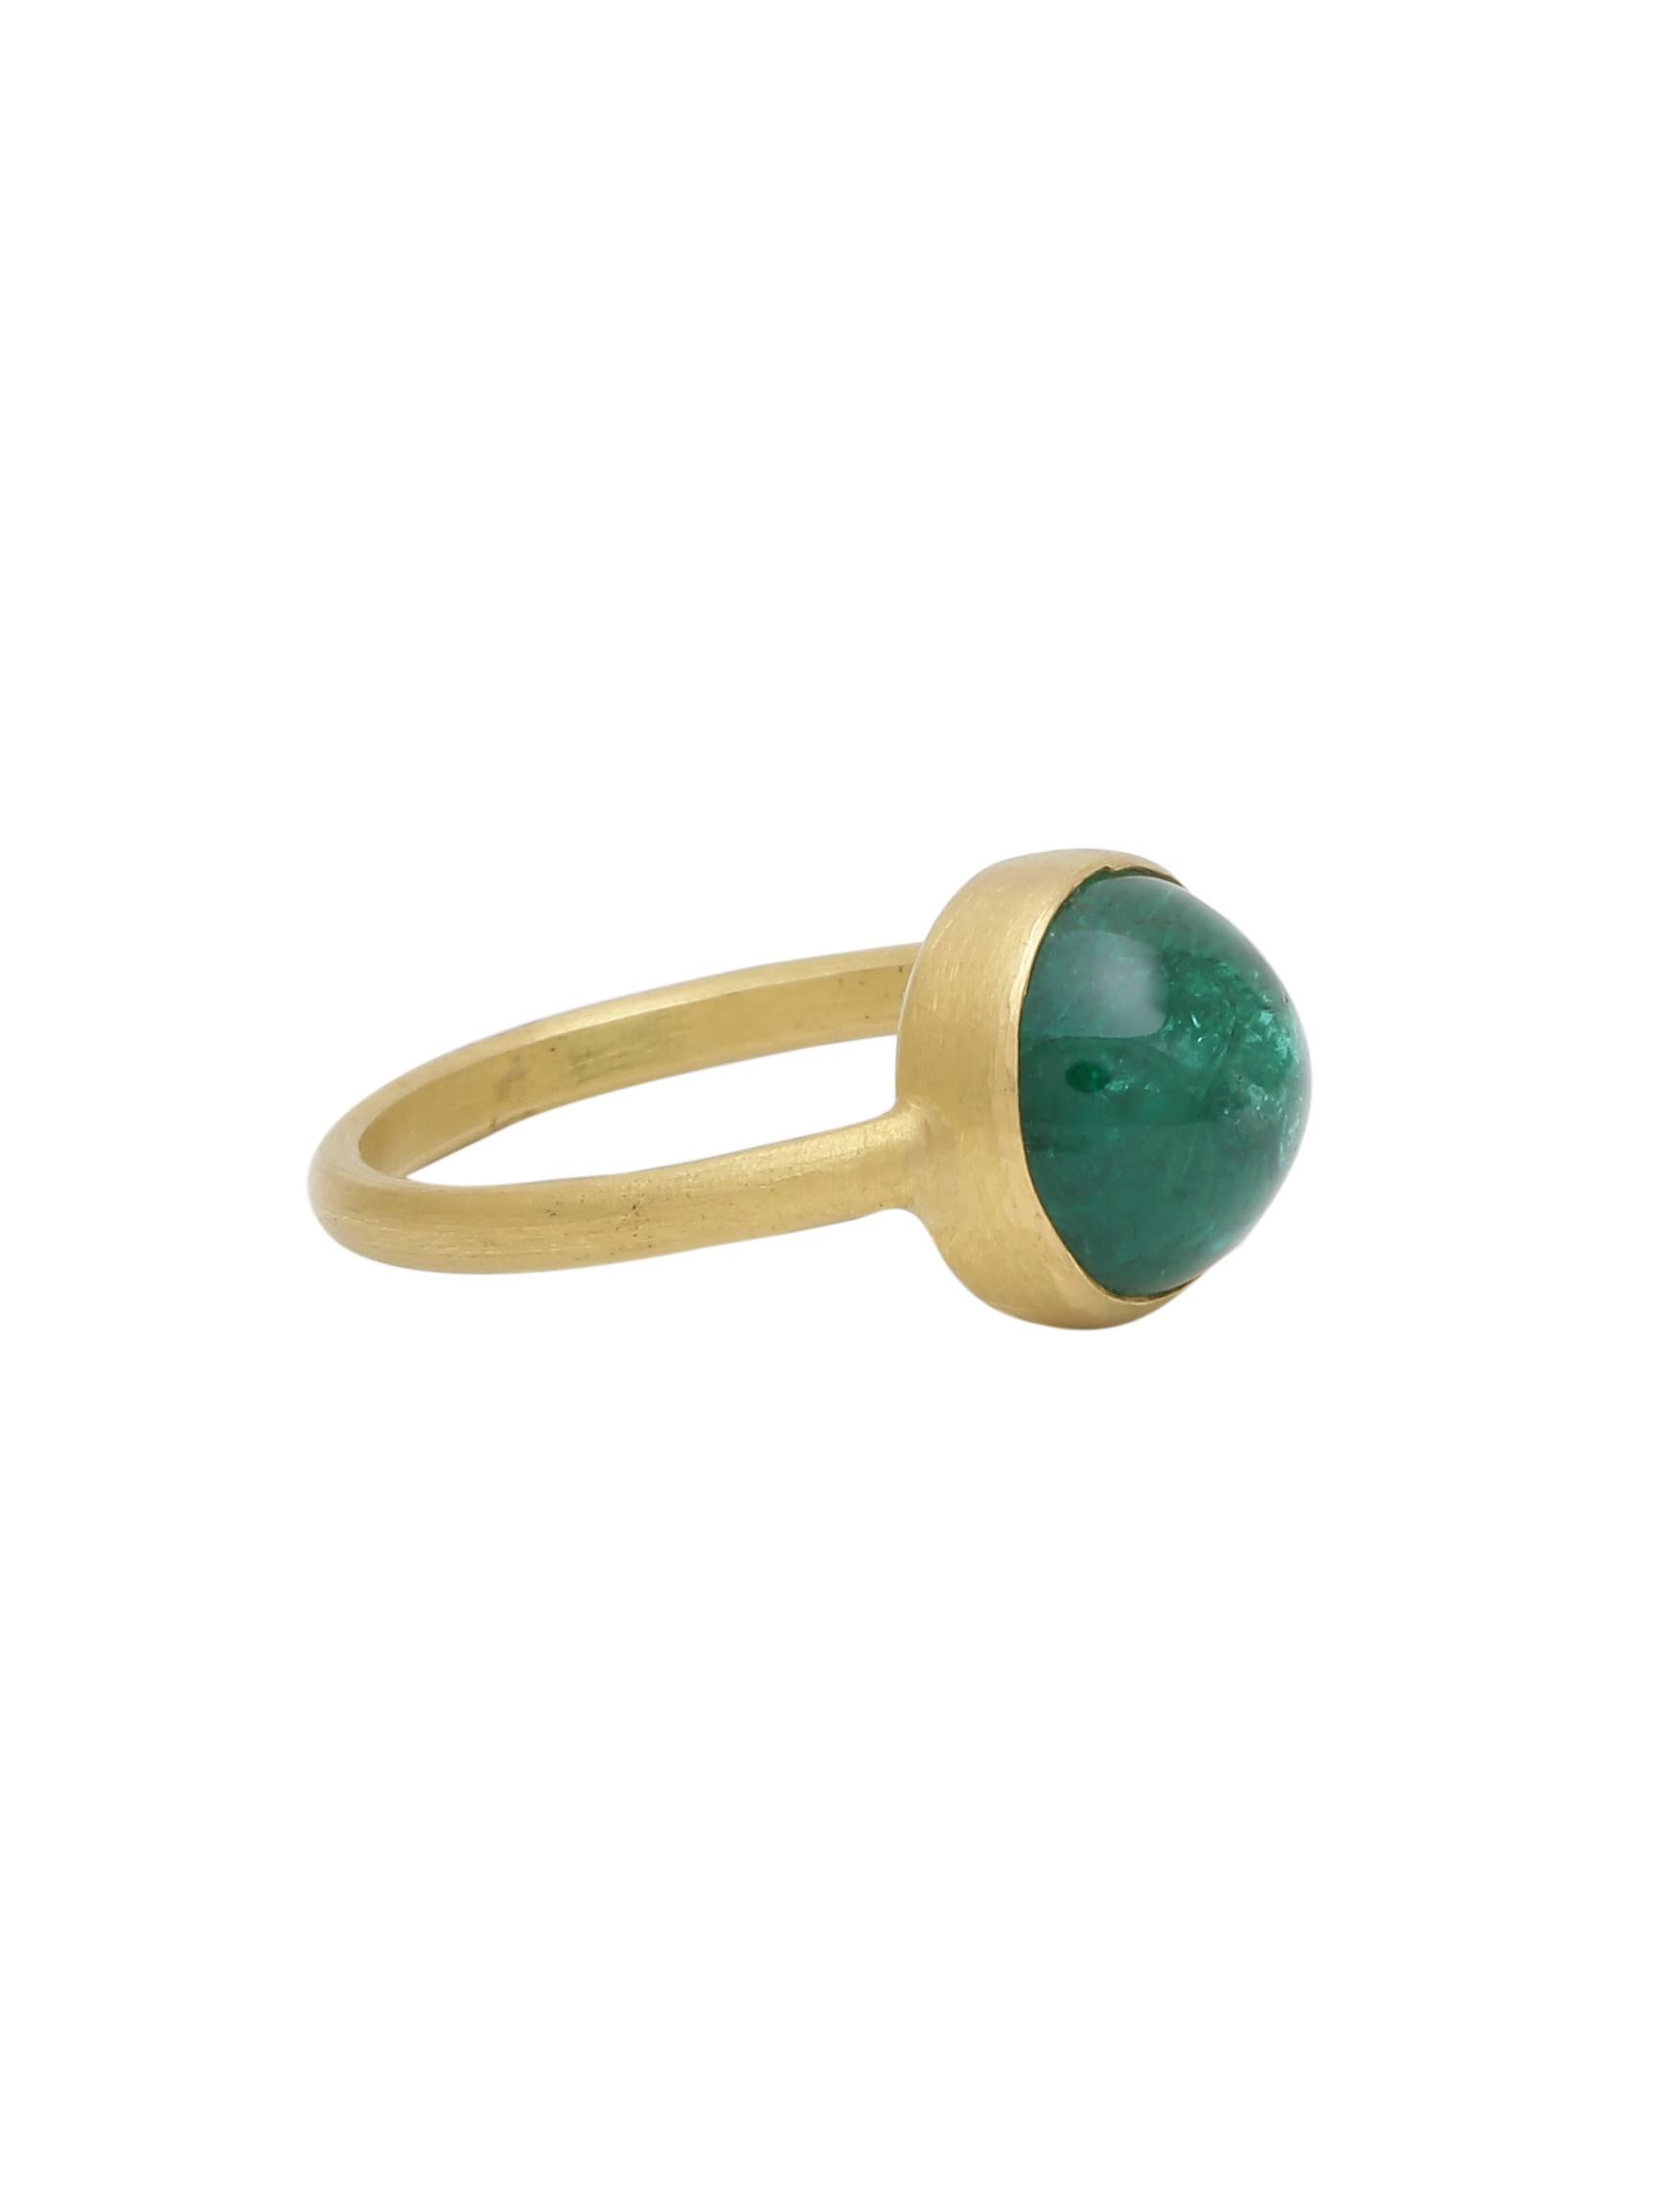 Art Deco Zambian Emerald Cabochon Handcrafted Ring in 18 Karat Yellow Gold For Sale